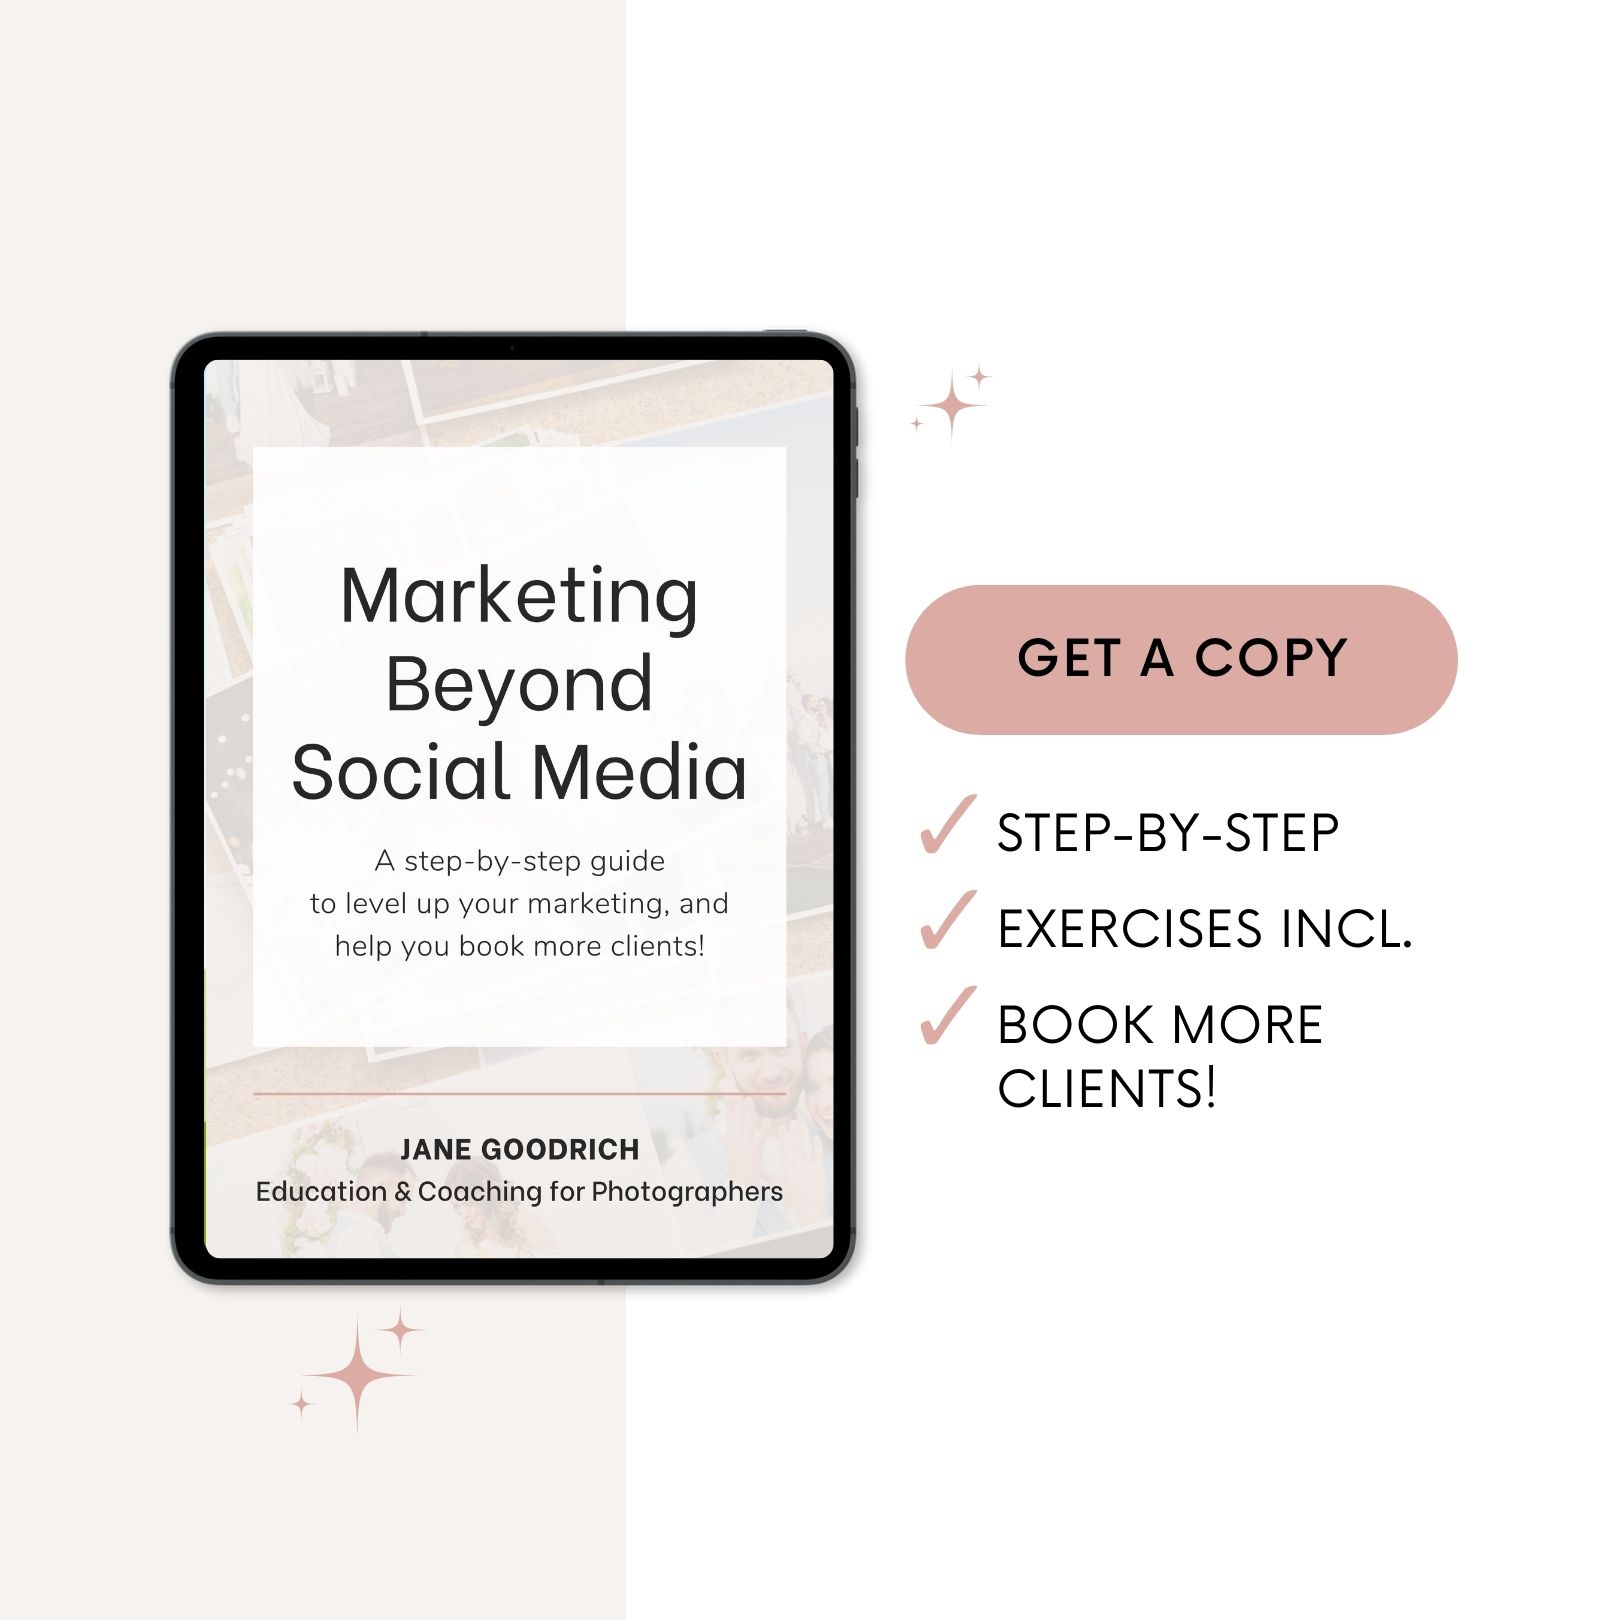 marketing beyond social media- how to market your photography business free download